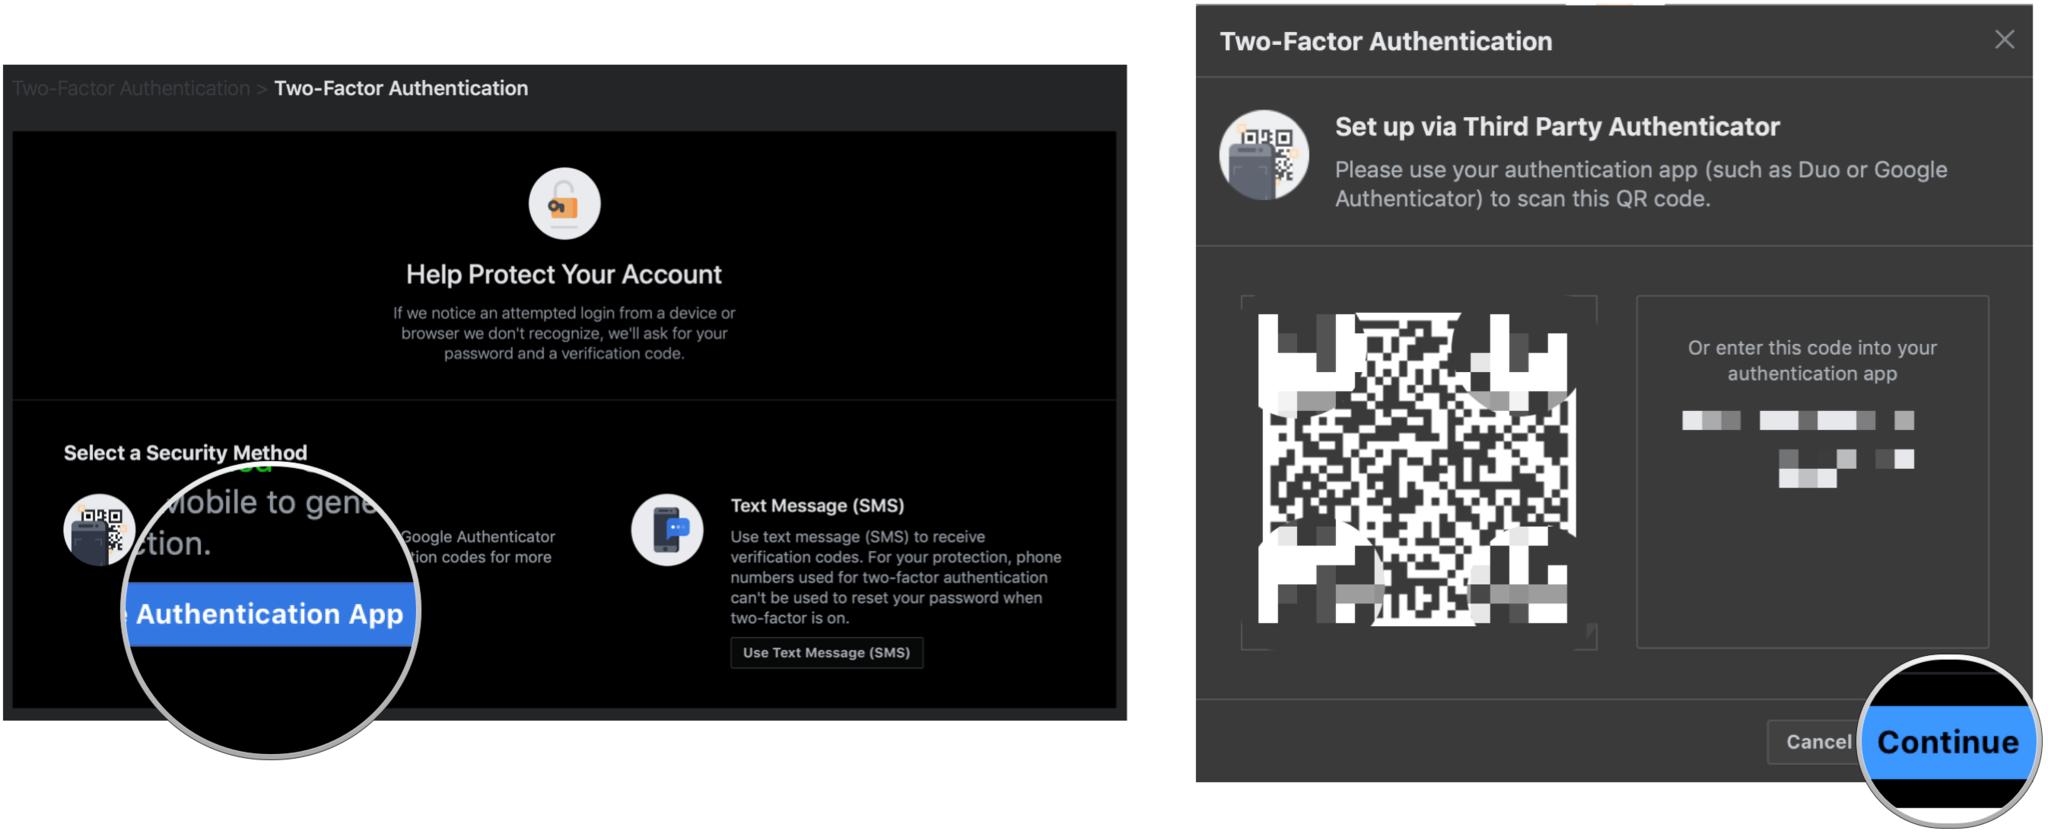 Set up two-factor authentication on Facebook on web by showing steps: Choose your 2FA method - we use an authenticator app in the example because it is more secure. Scan your QR code or input the secure code into your authenticator app, then click Continue